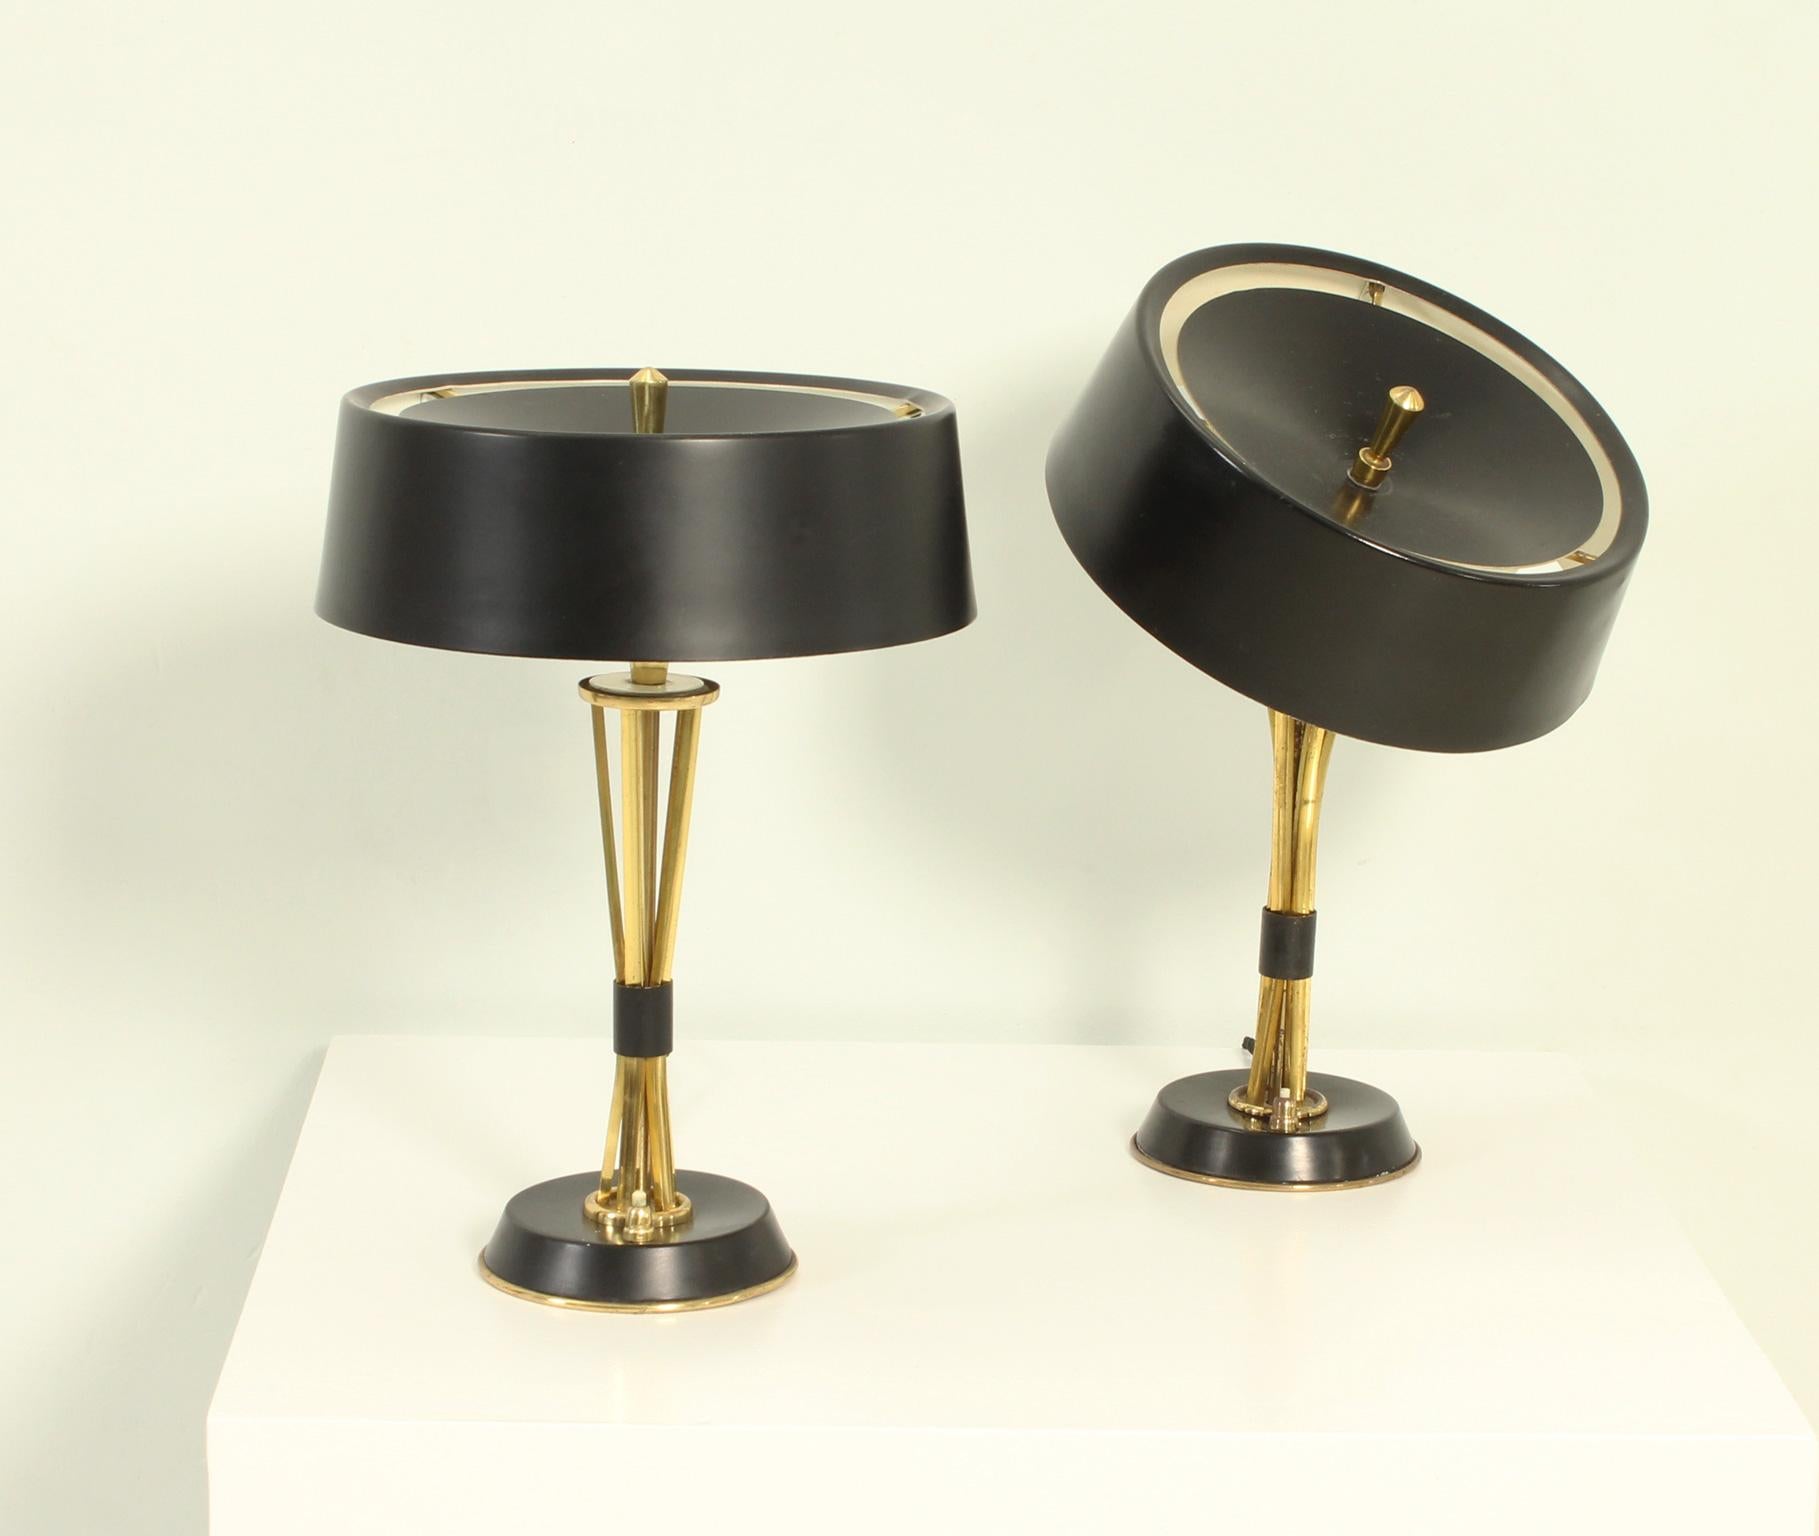 Pair of table lamps designed by Oscar Torlasco for Lumi, Italy 1960's. Adjustable shade that can take different positions. Shade and base in black lacquered aluminum and brass stem and details. They are the medium model.